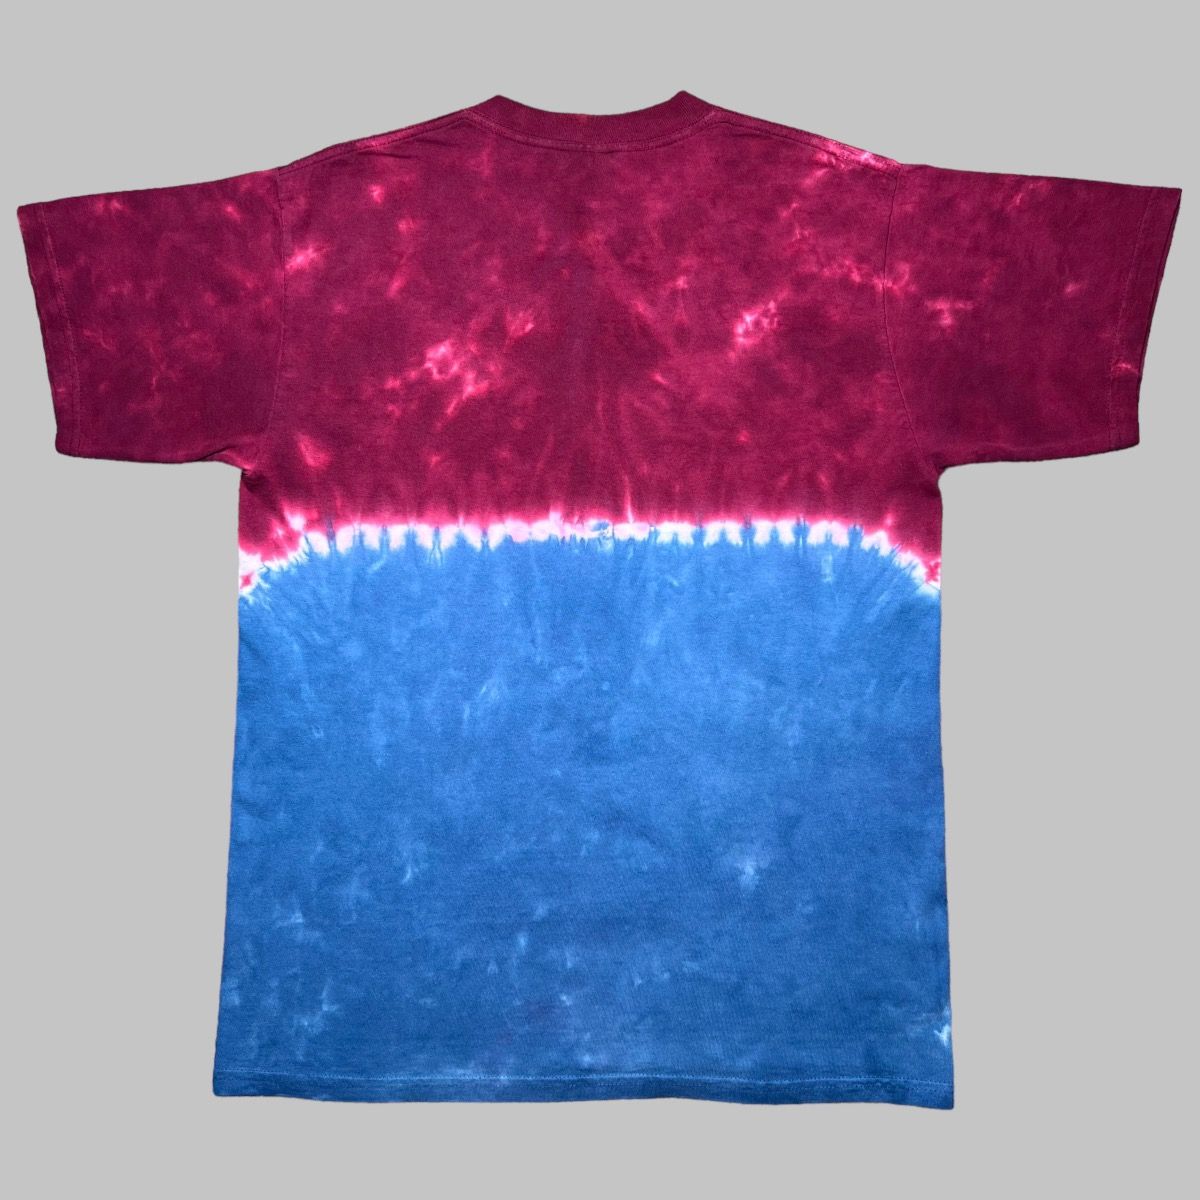 Vintage Vintage 1990s NHL Colorado Avalanche Tie Dye All Over Tee Size US M / EU 48-50 / 2 - 2 Preview